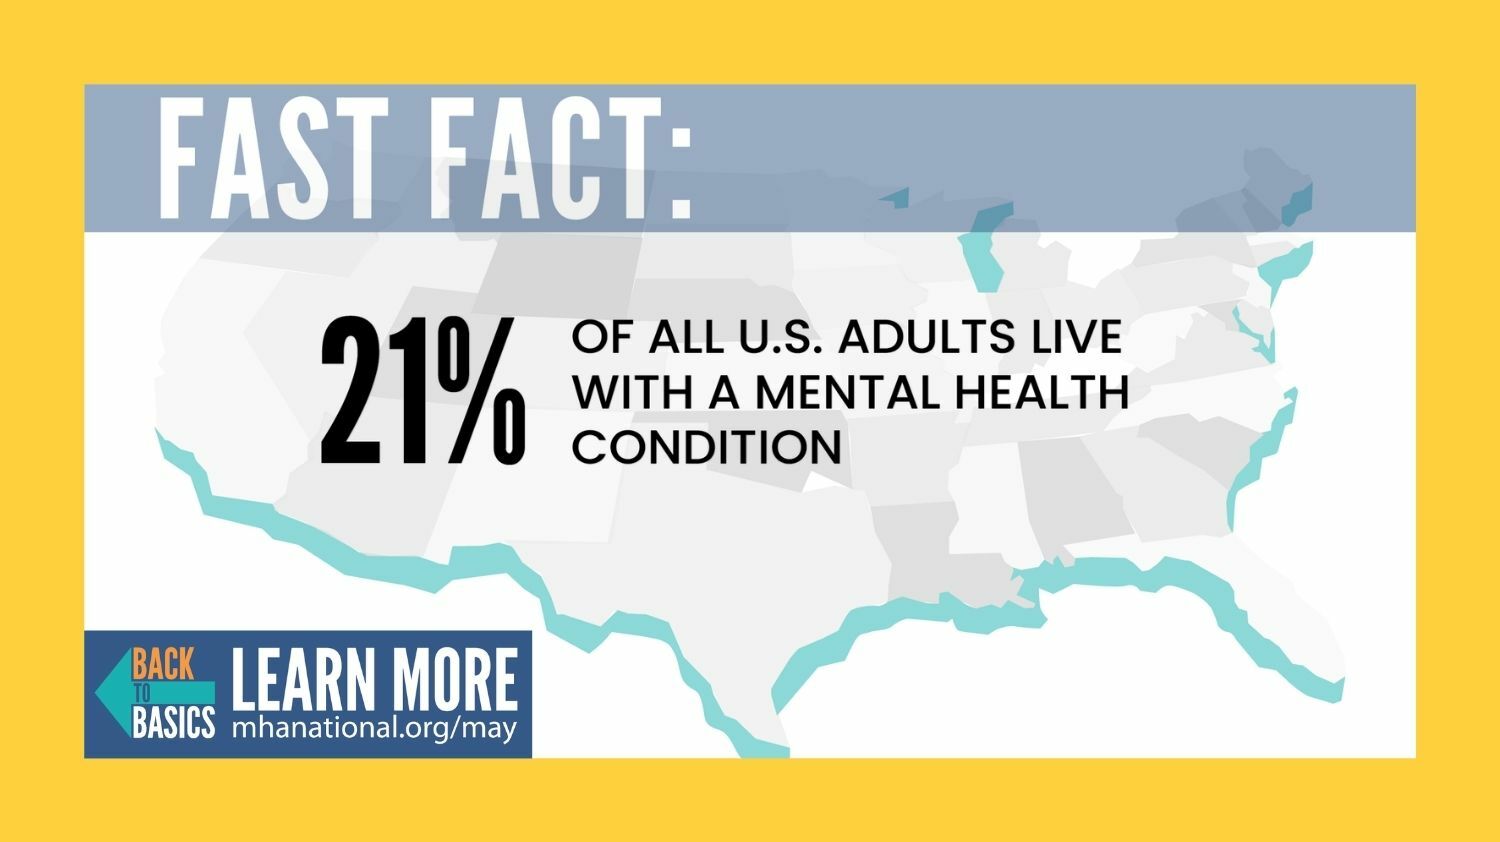 Fast Fact: 21% of all US adults live with a mental health condition